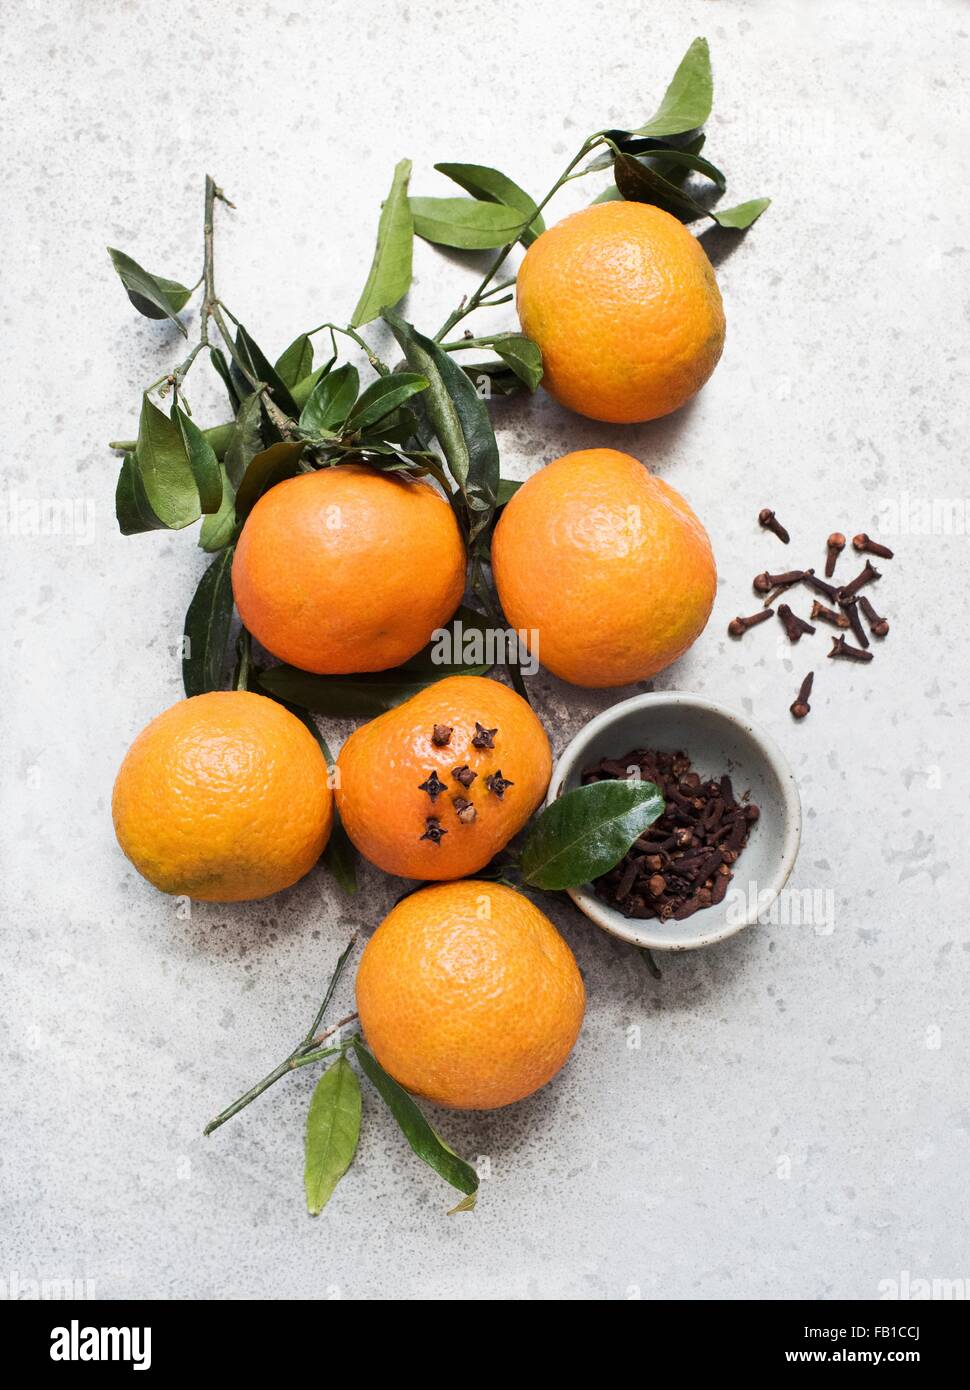 Overhead view of oranges decorated with cloves Stock Photo